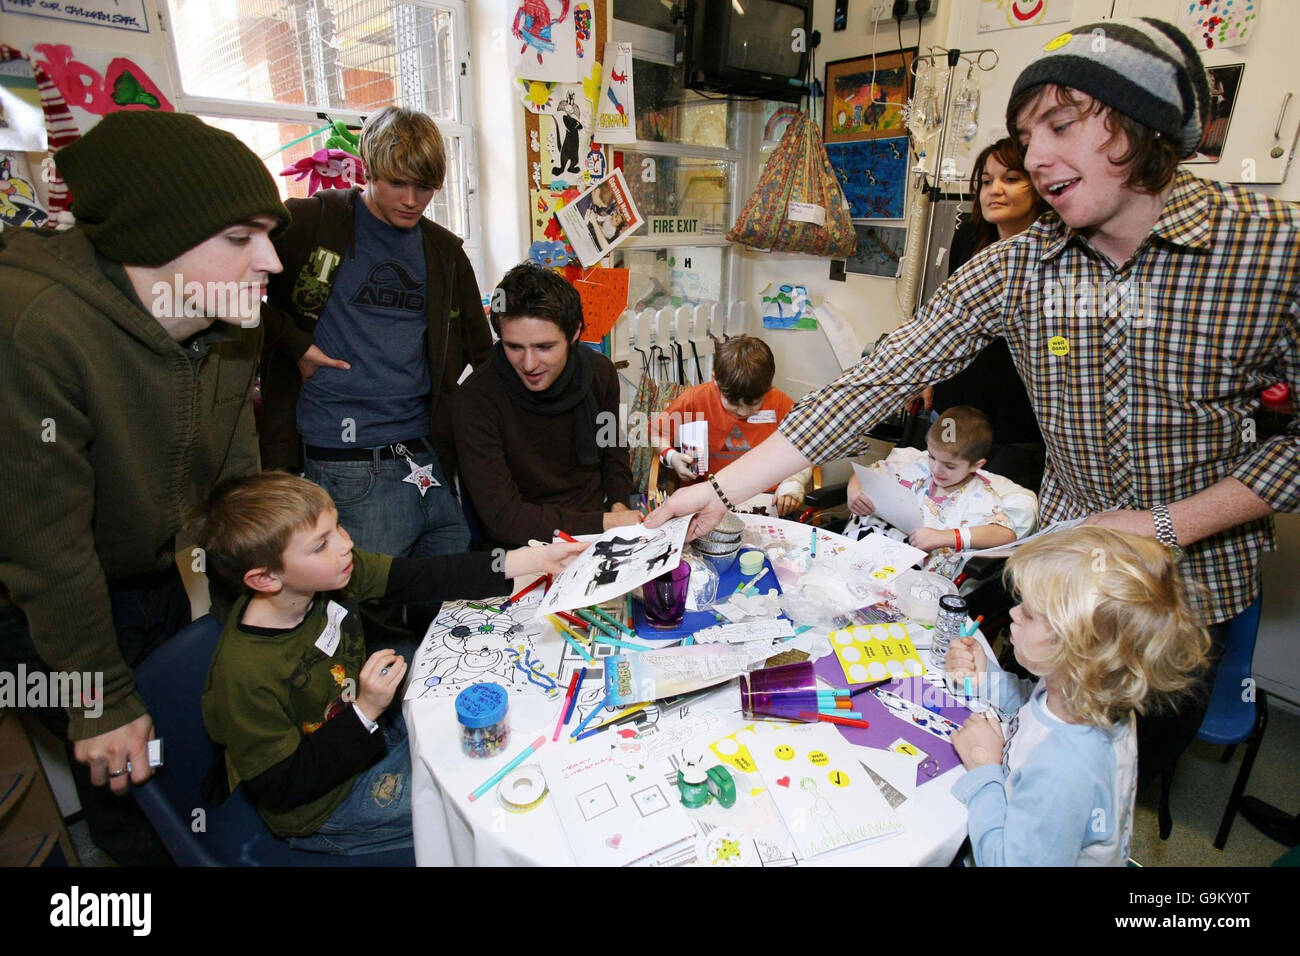 Danny Jones (right), of McFly, hands an autographed band photo to Tom Ursell, age 8 of Epson, as the other members of the band, (left to right) Tom Fletcher, Dougie Poynter and Harry Judd, look on at Great Ormond Street Children's Hospital in central London. Stock Photo